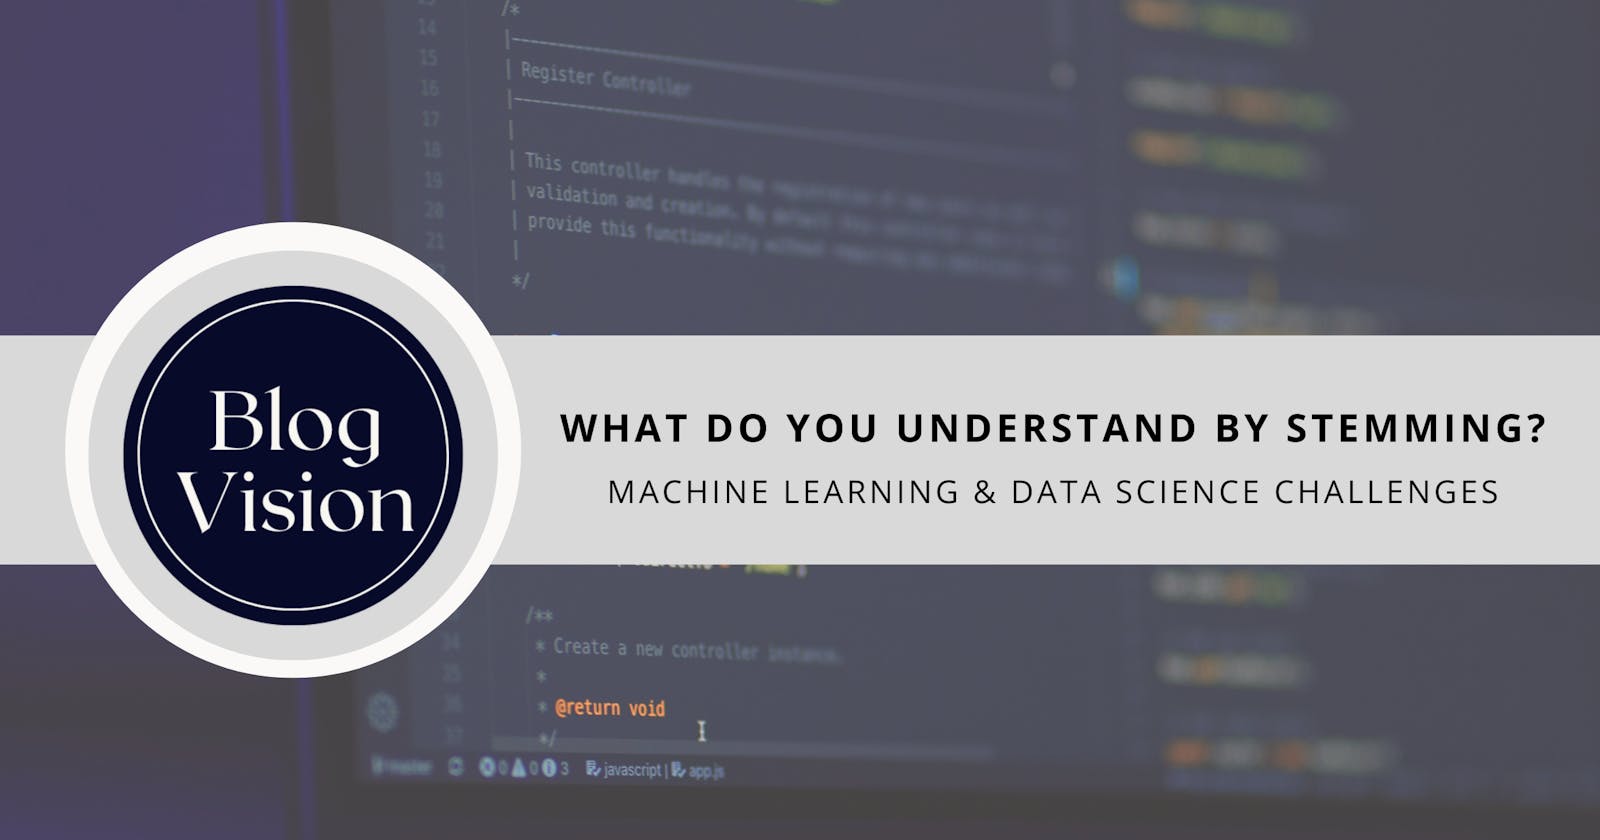 #84 Machine Learning & Data Science Challenge 84